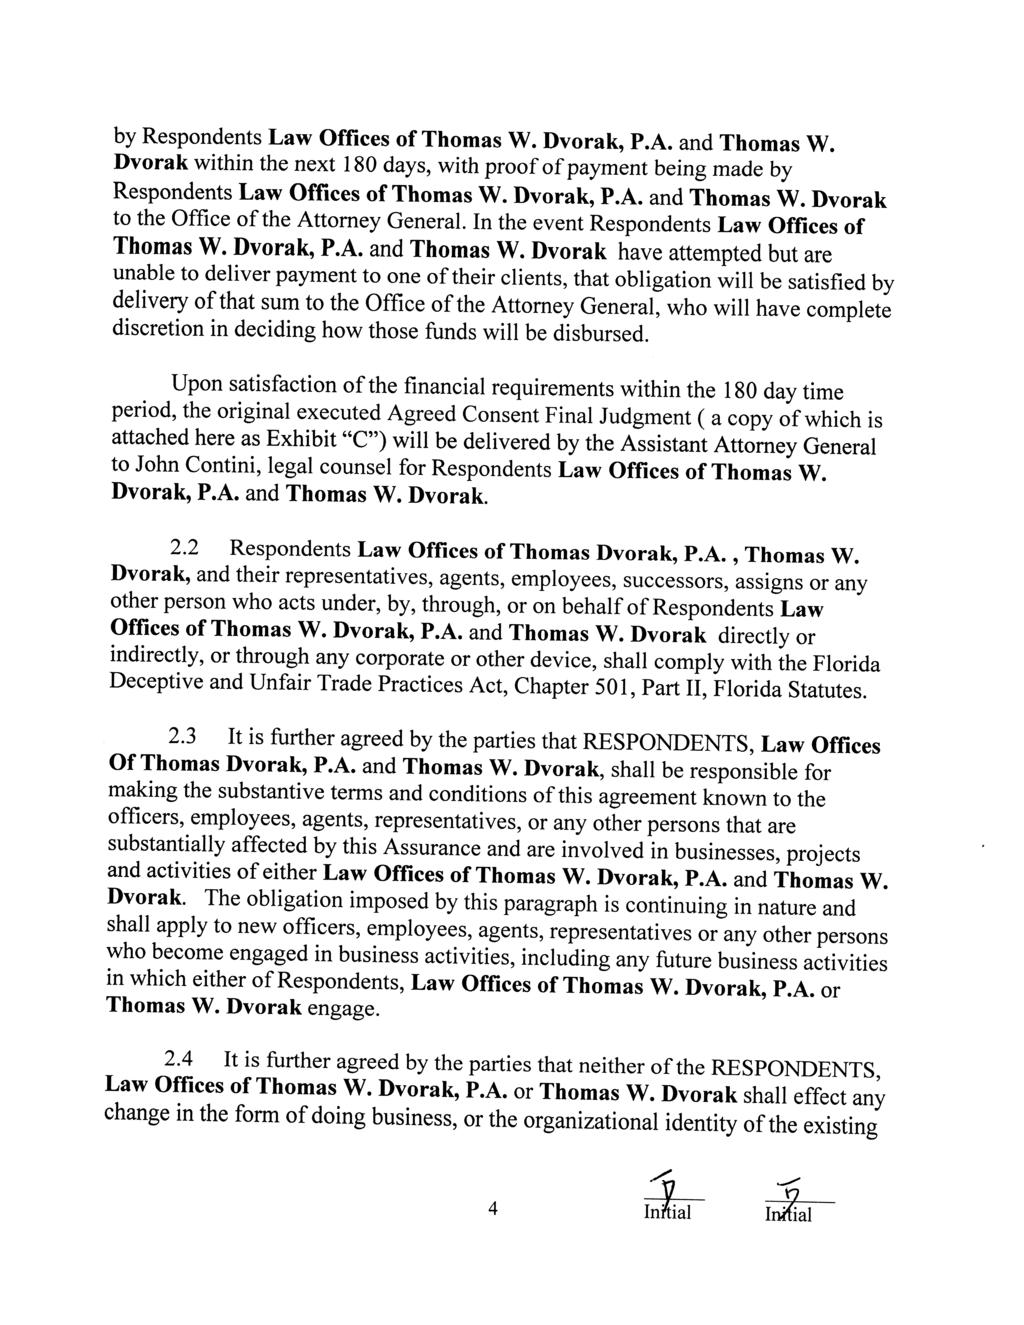 by Respondents Law Offices of Thomas W. Dvorak, P.A. and Thomas W. Dvorak within the next 180 days, with proof of payment being made by Respondents Law Offices of Thomas W. Dvorak, P.A. and Thomas W. Dvorak to the Office of the Attorney General.